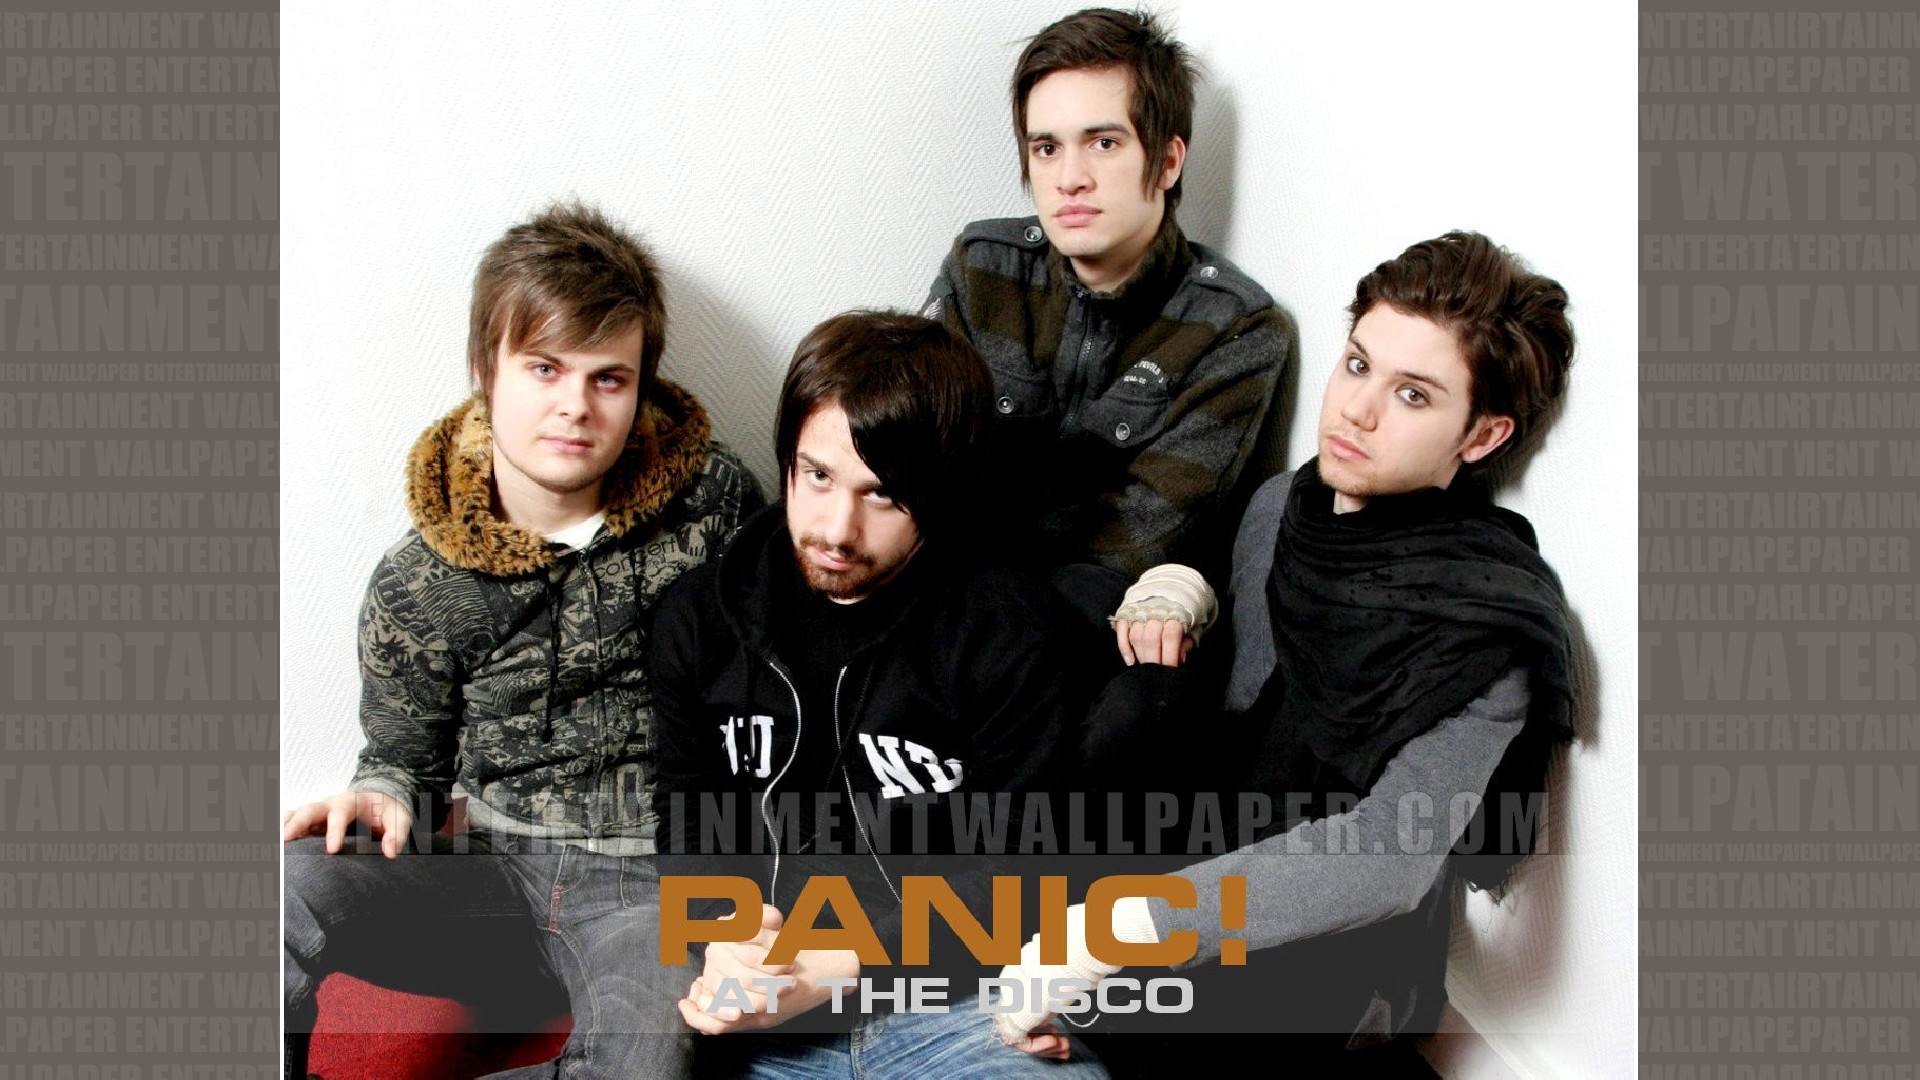 Panic At the Disco Wallpaper – Original size, download now.